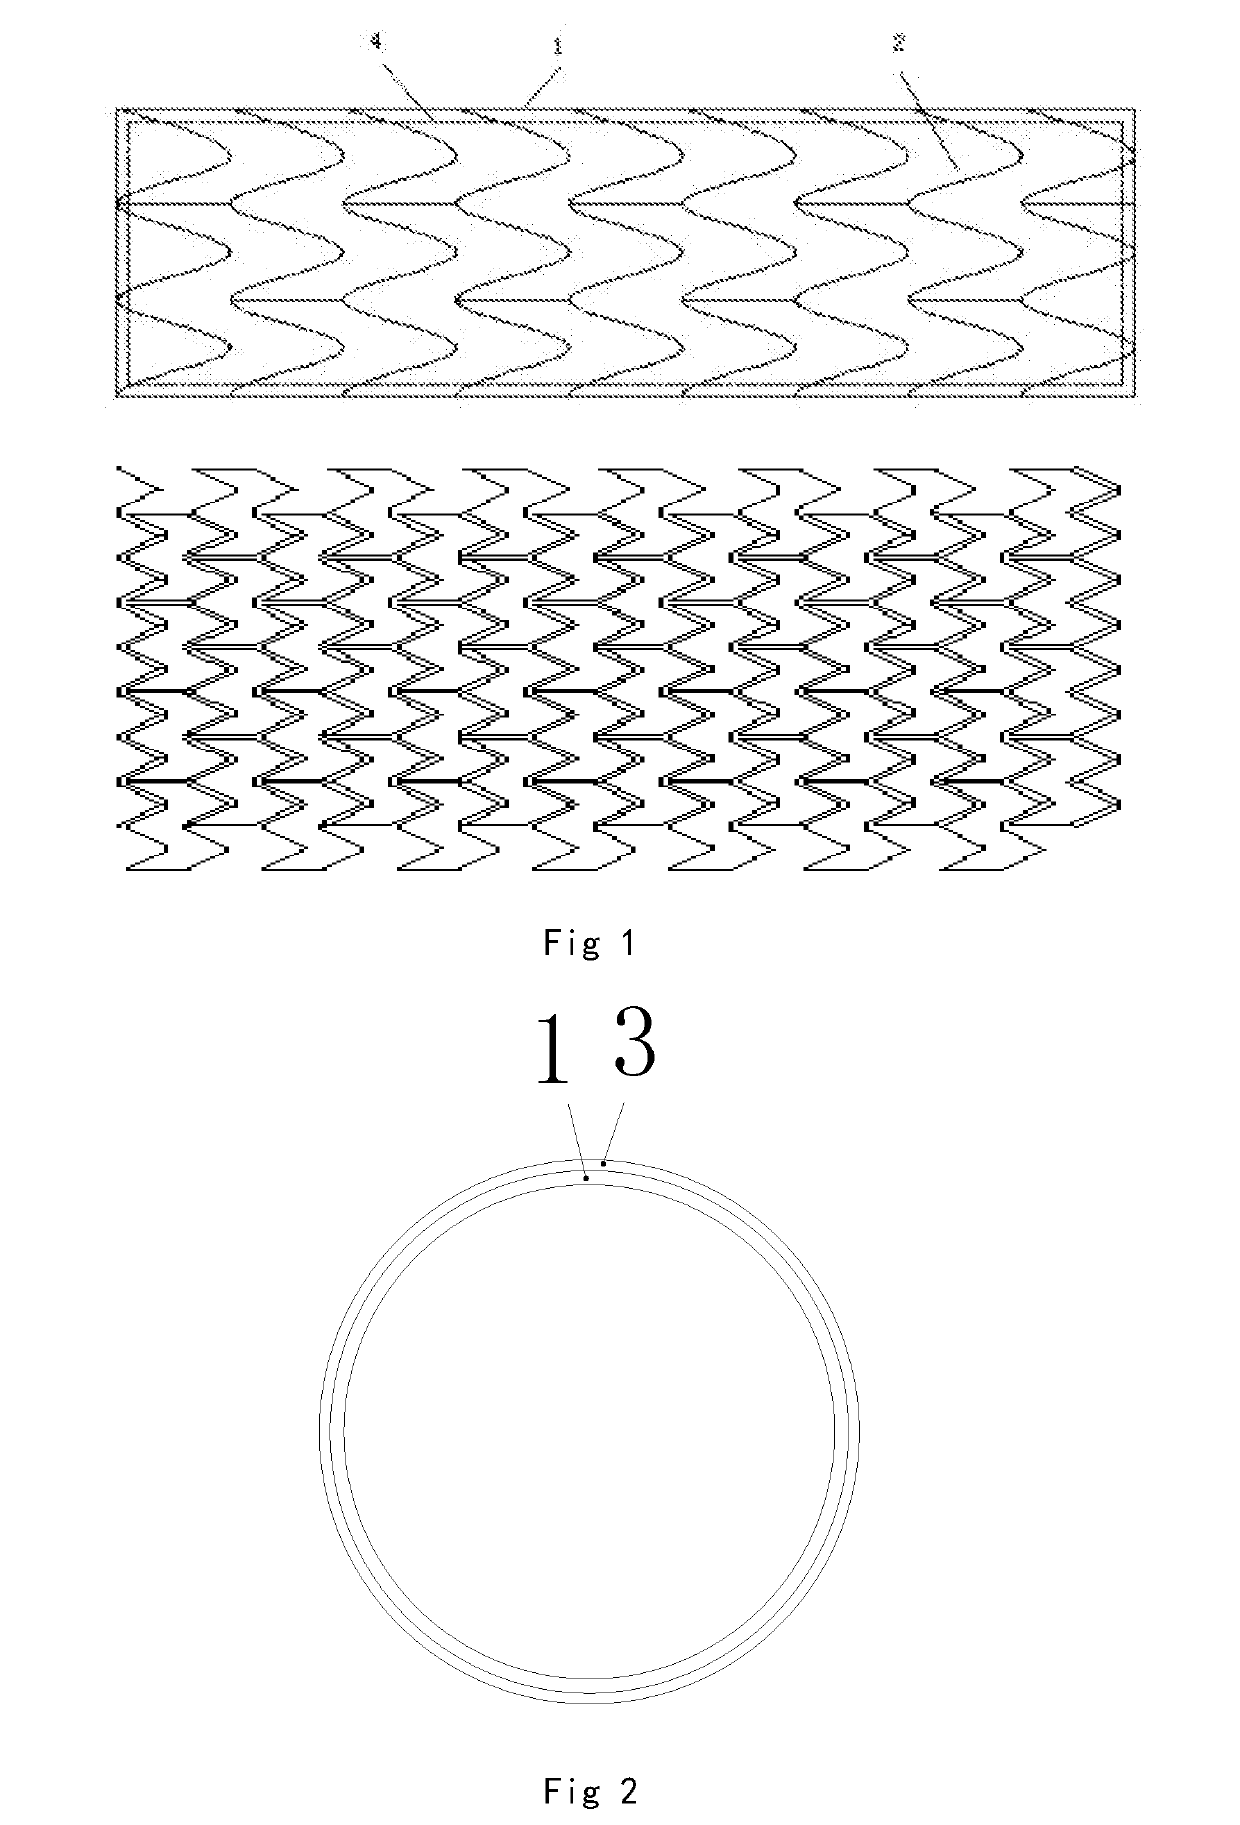 Balloon expandable, bioabsorbable, drug-coated sinus stent